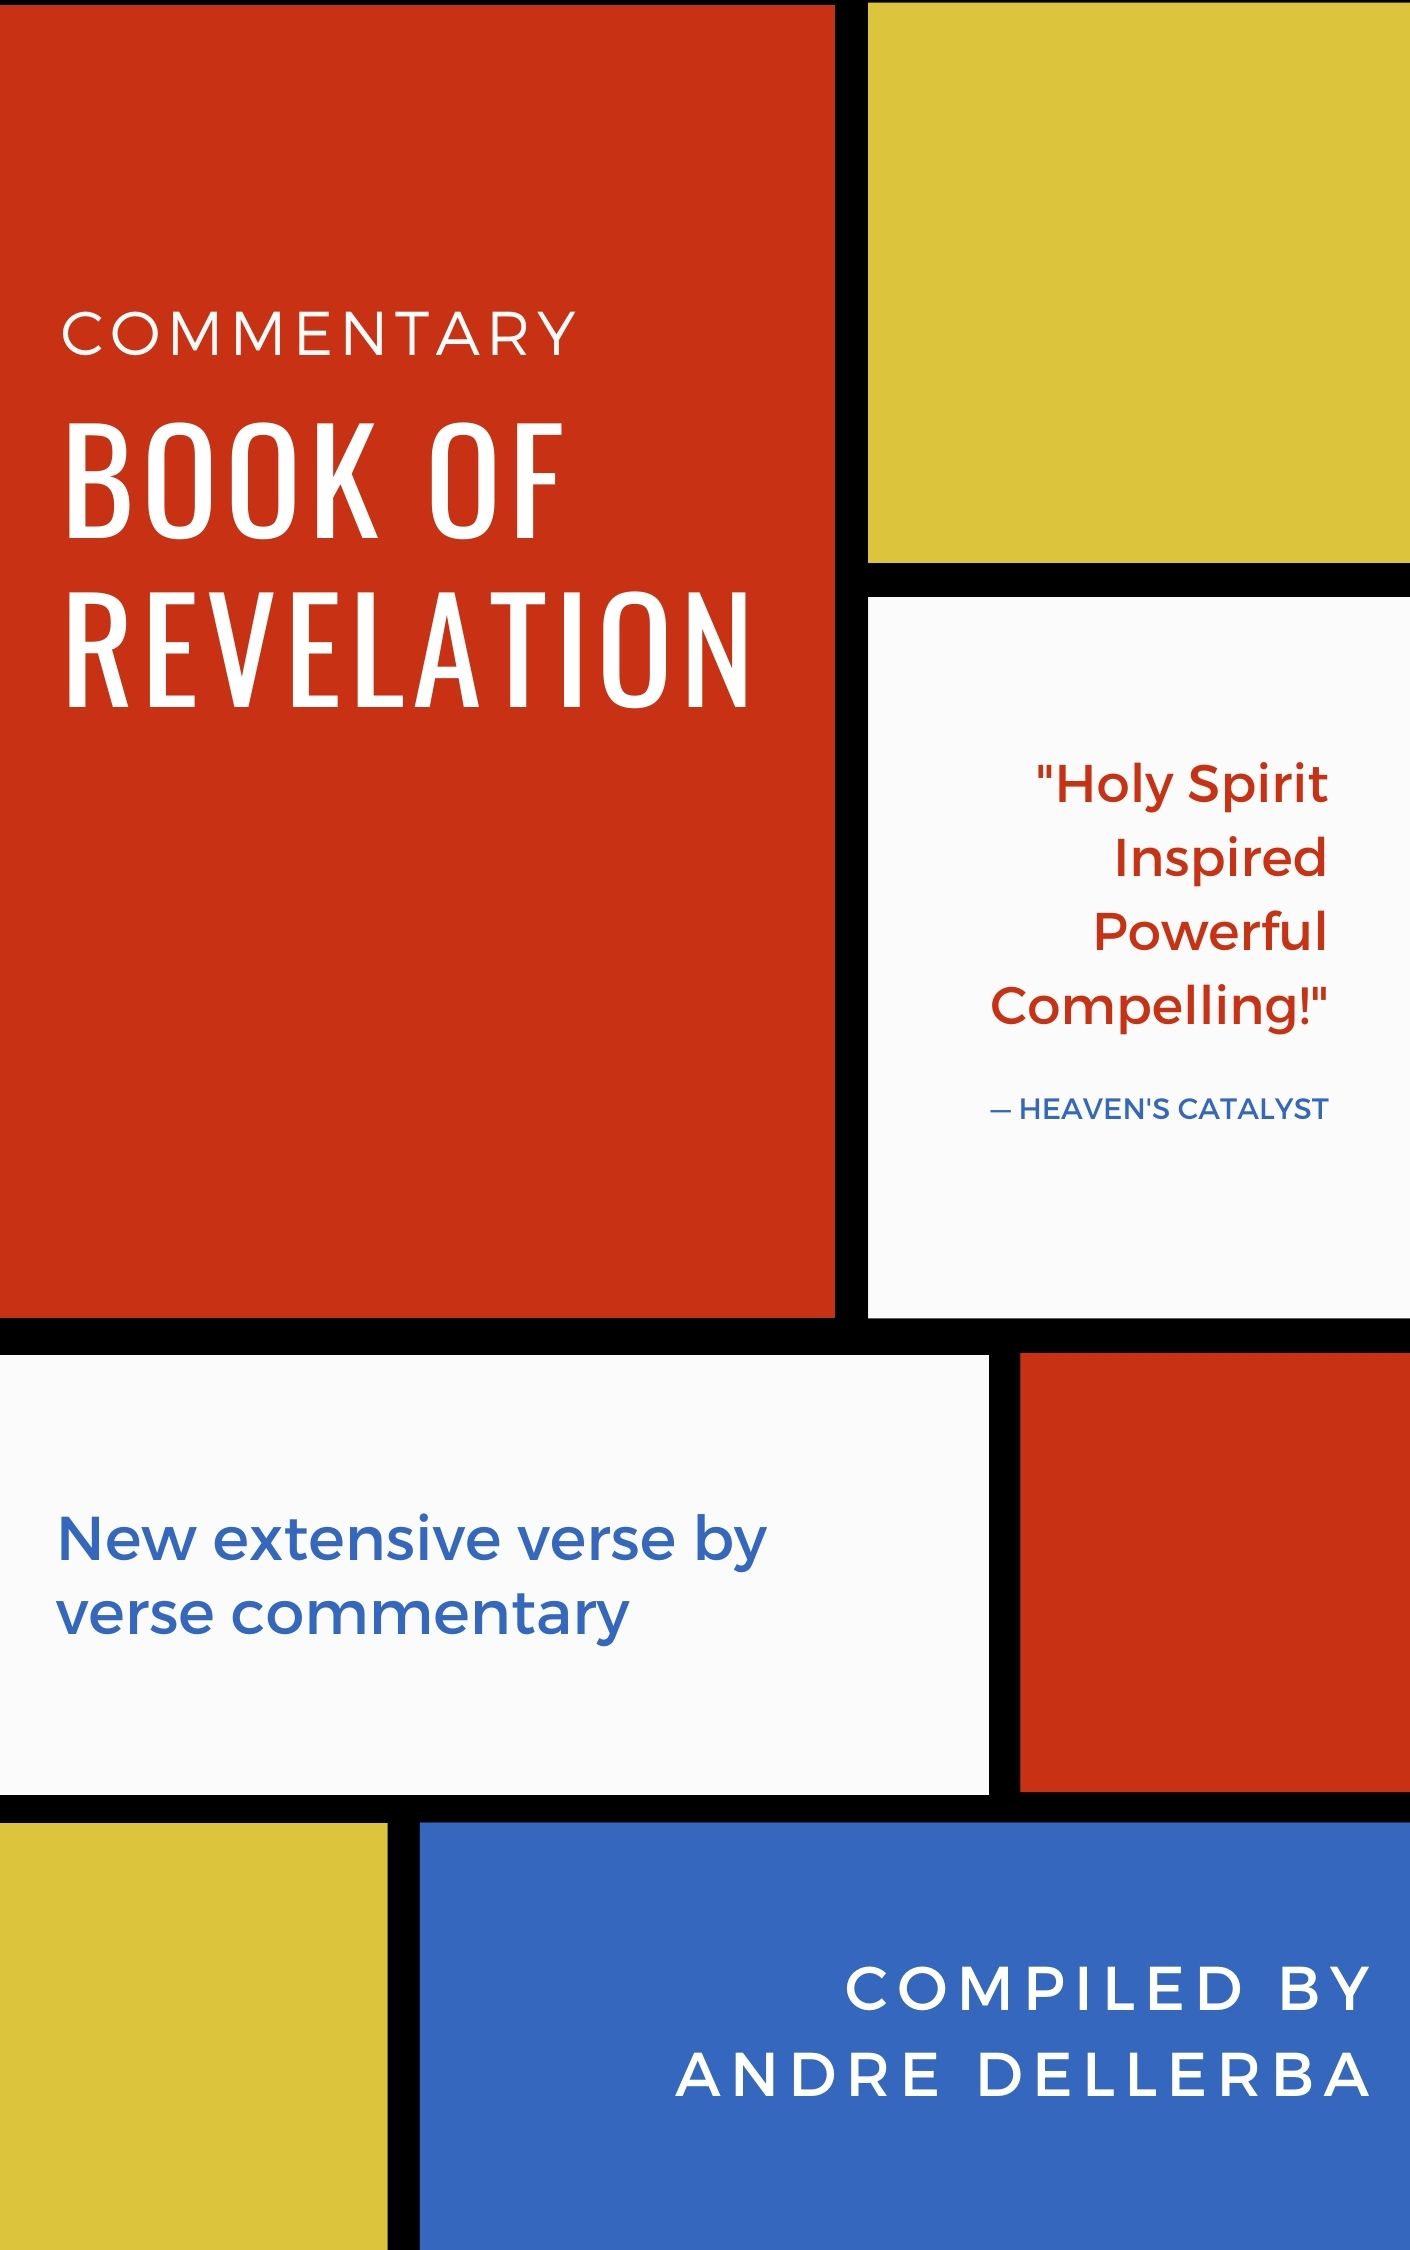 Book of Revelation commentary made simple